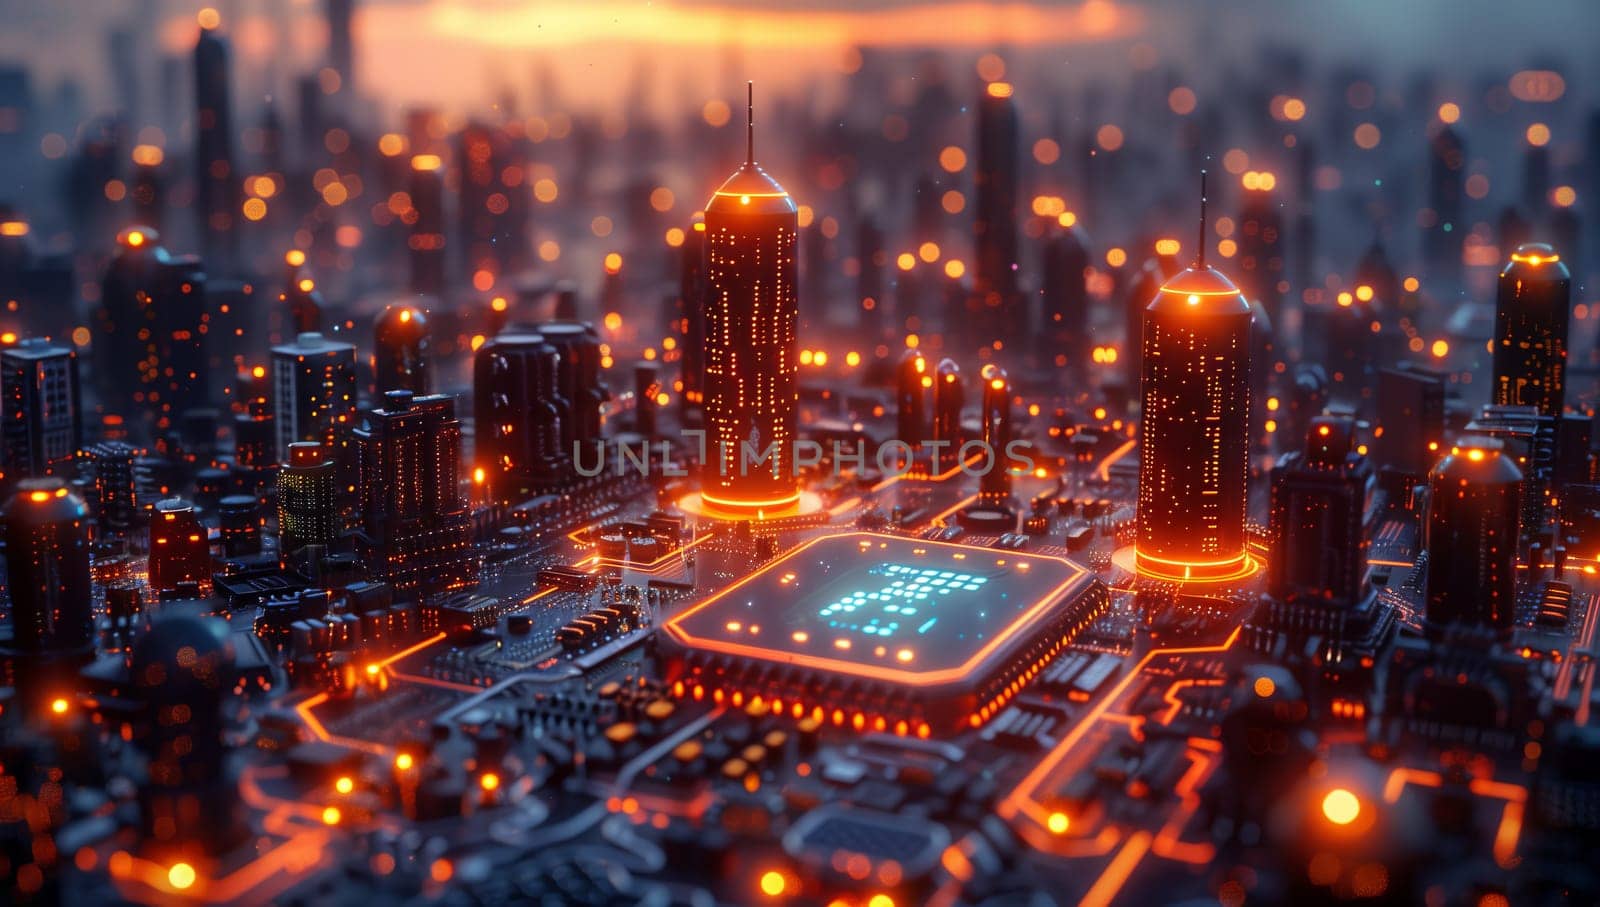 A breathtaking aerial view of a futuristic metropolis with a central CPU building, surrounded by a stunning urban landscape and cityscape